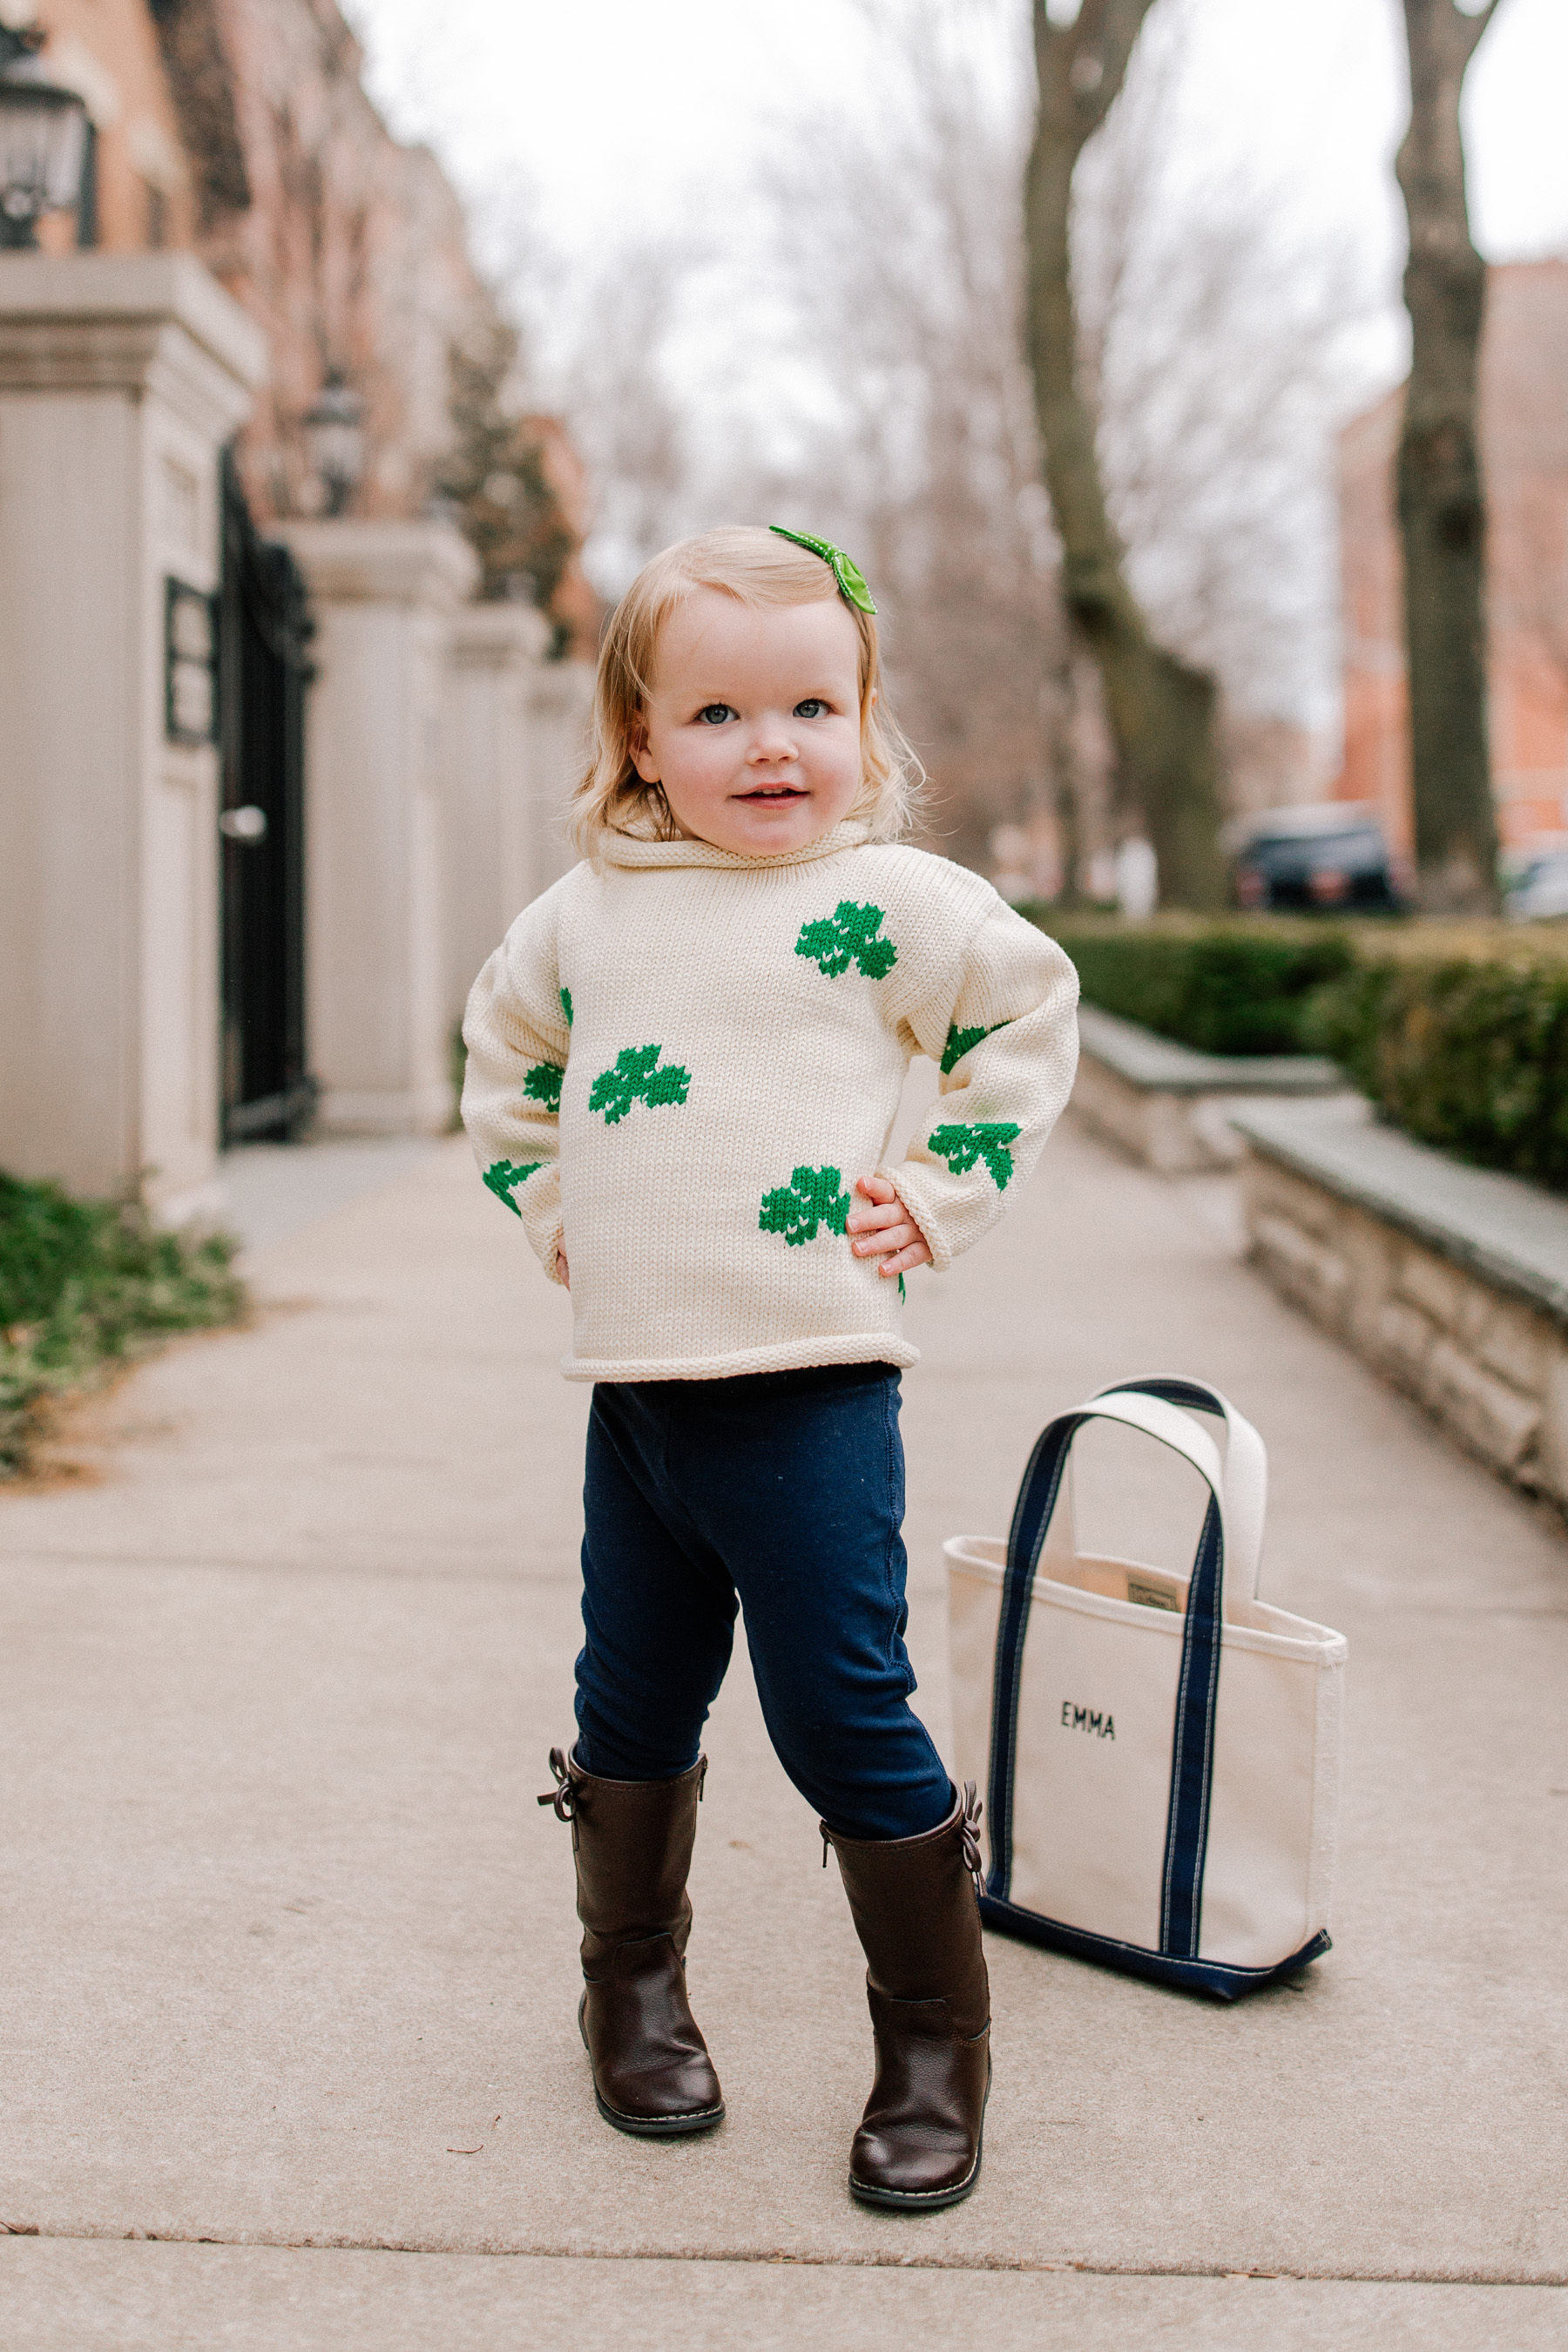 Emma's Outfit: Claver Shamrock Sweater / L.L. Bean Tote c/o / Gap Kids Jeggings and Boots / Little Makes Big Bow c/o